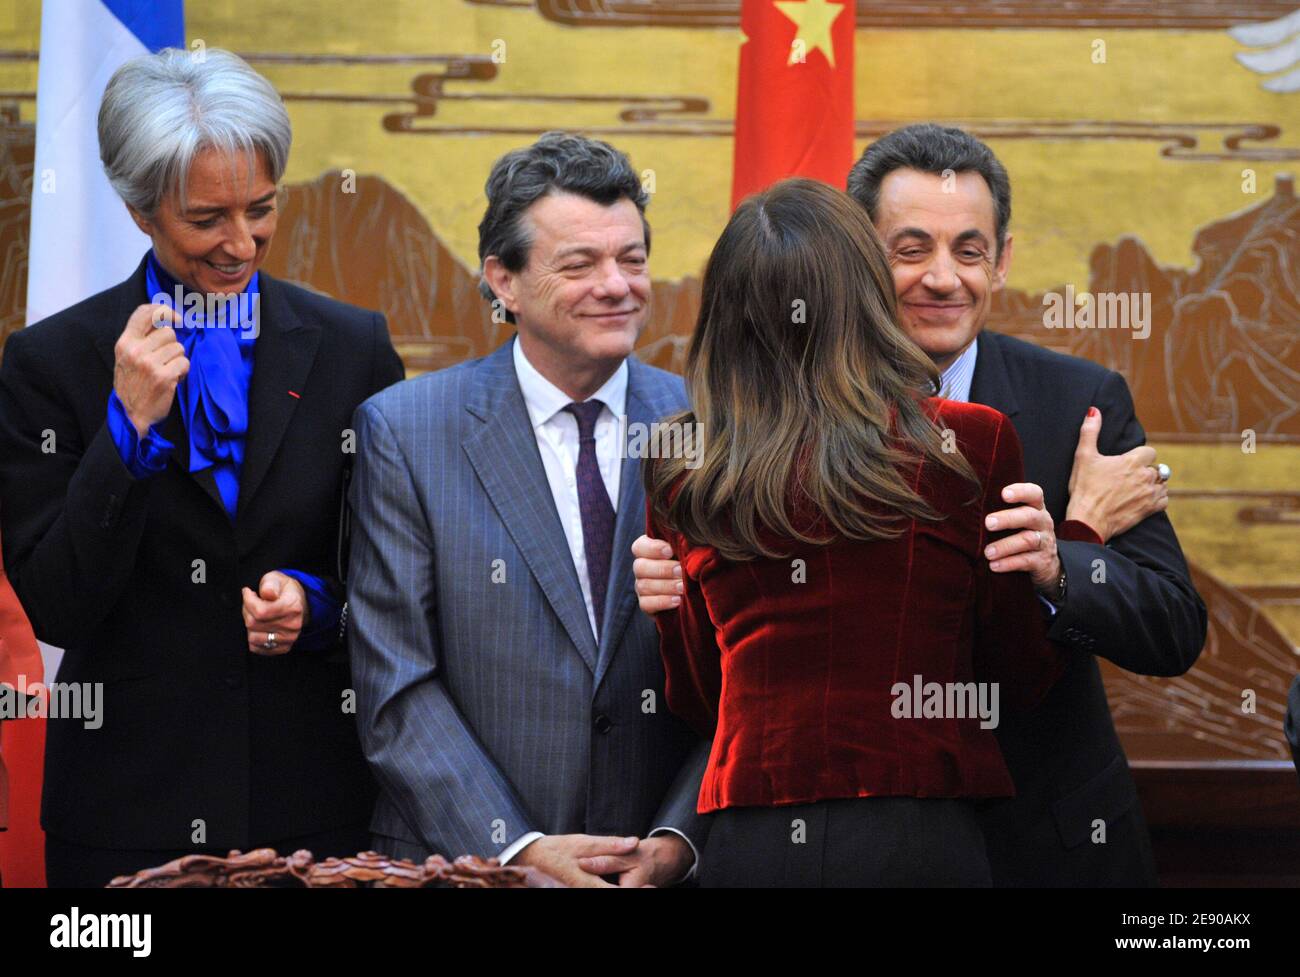 French president Nicolas Sarkozy and members of his government attends a meeting with President of the People Republic of China Hu Jintao at the 'Great Hall of People' during three day state visit in Beijing, China, on November 26, 2007. Photo by Christophe Guibbaud/ABACAPRESS.COM Stock Photo